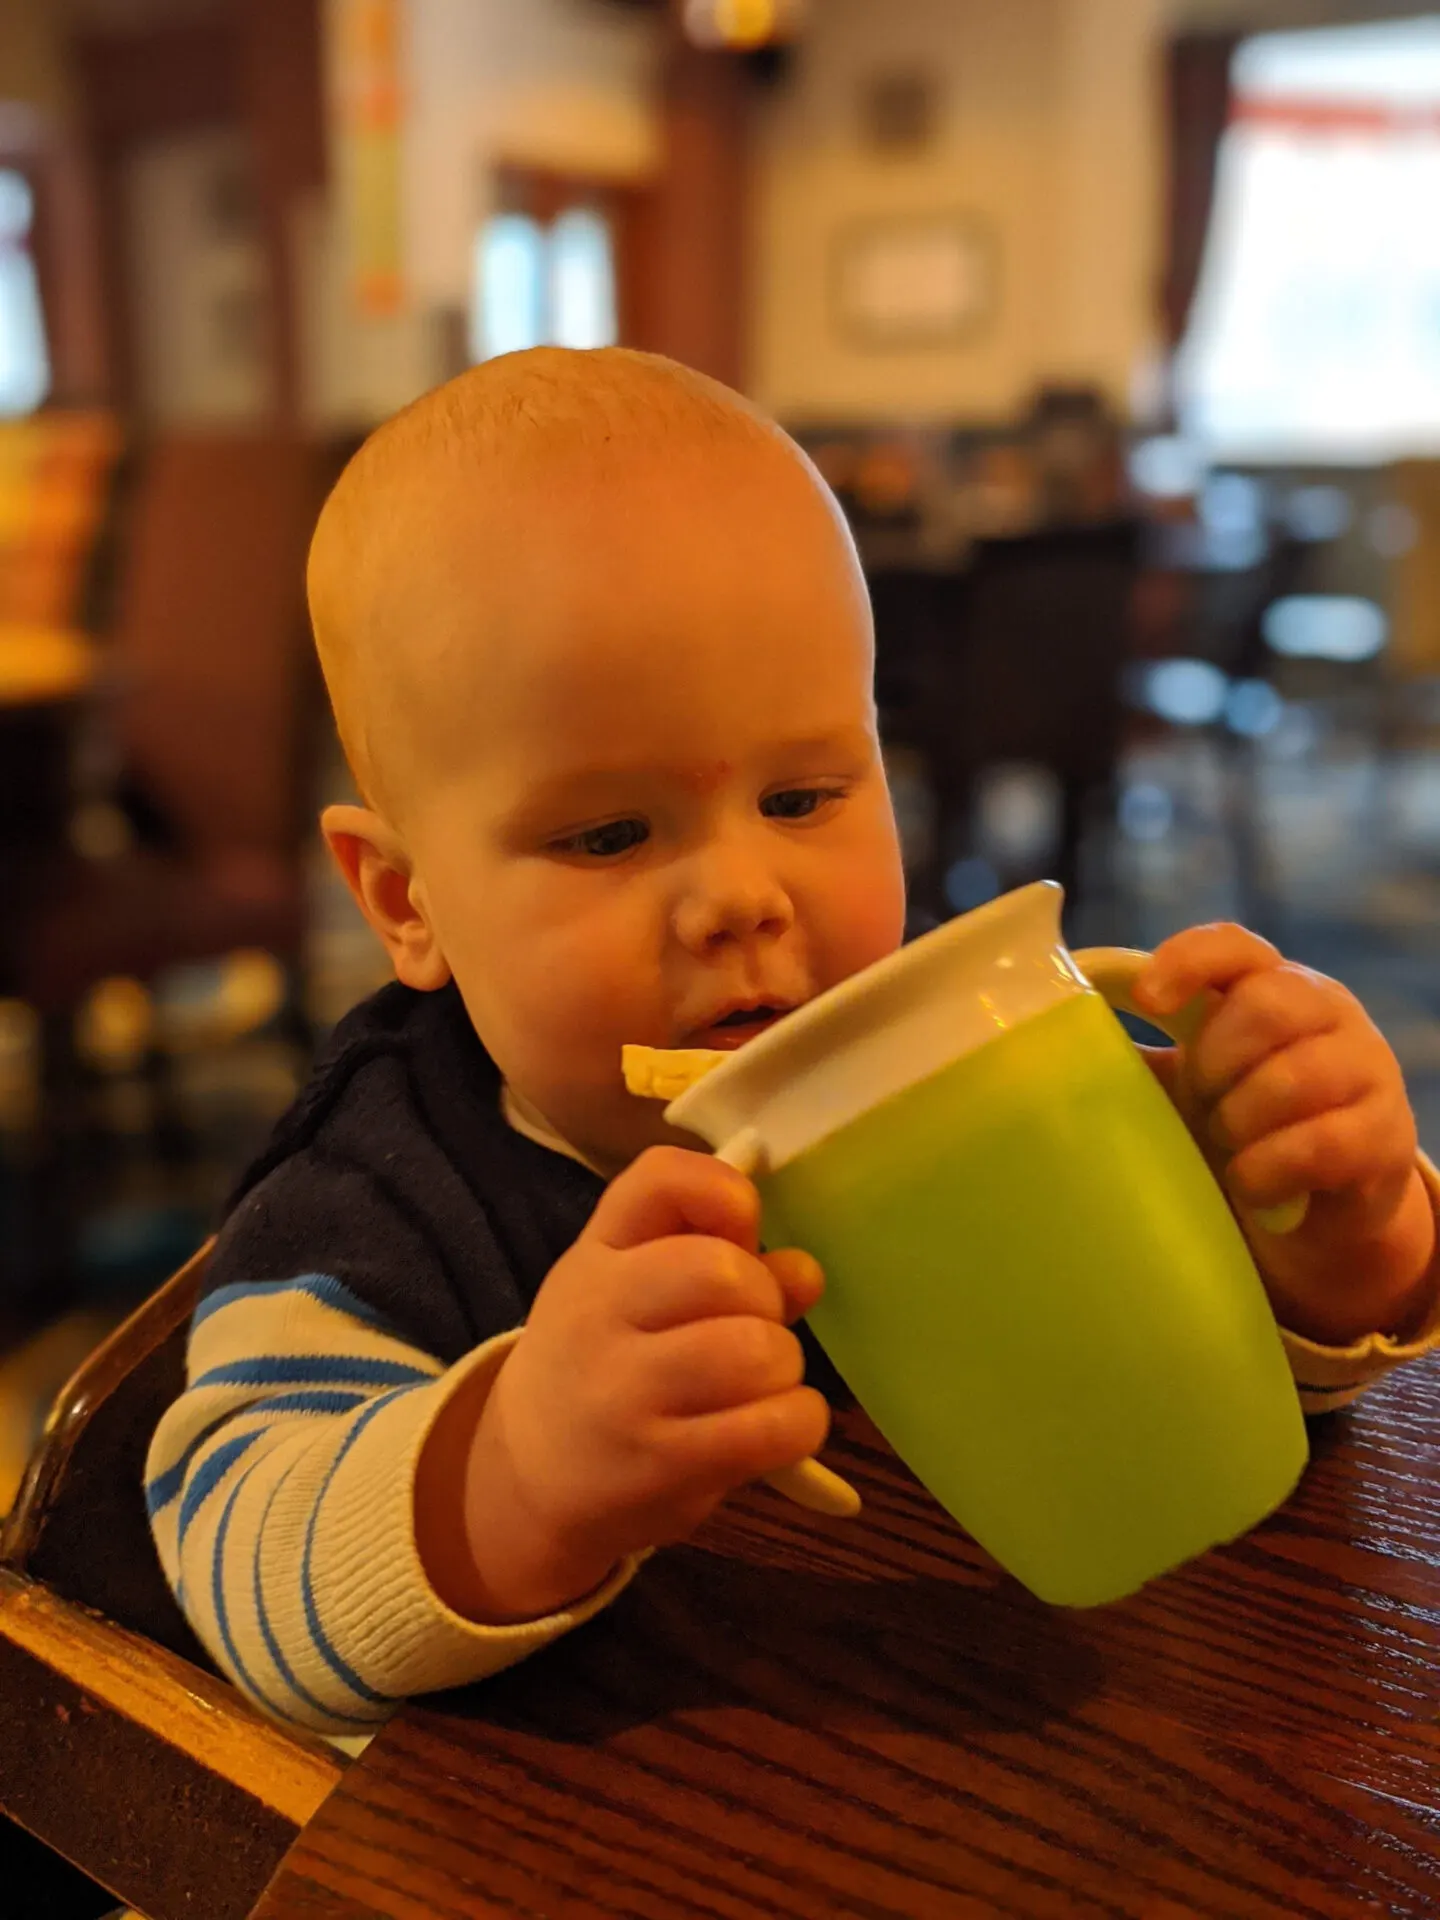 Baby Drinking Cup